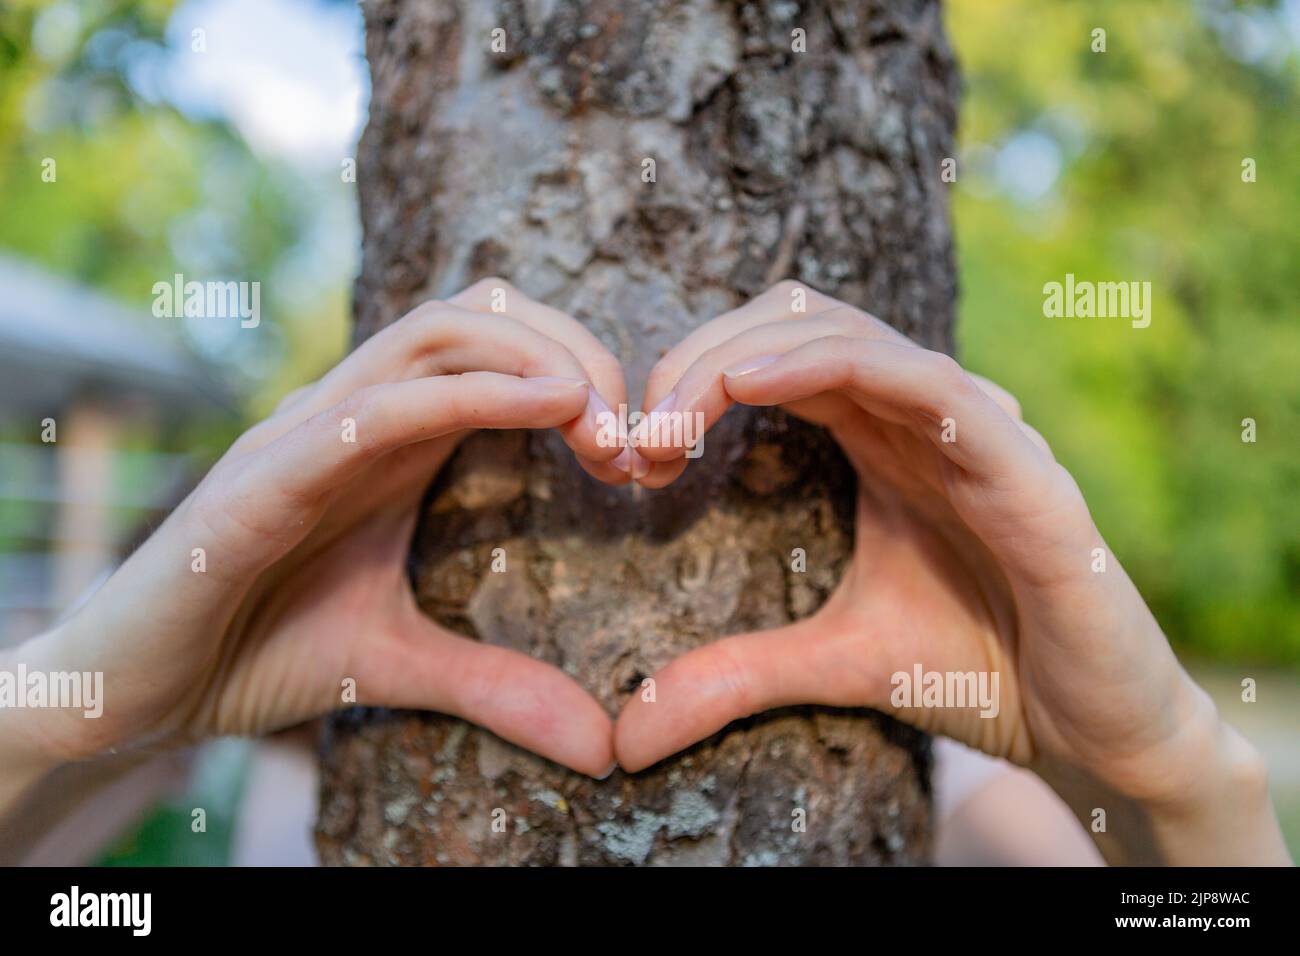 Women's hands show the heart in front of the tree trunk. Stock Photo